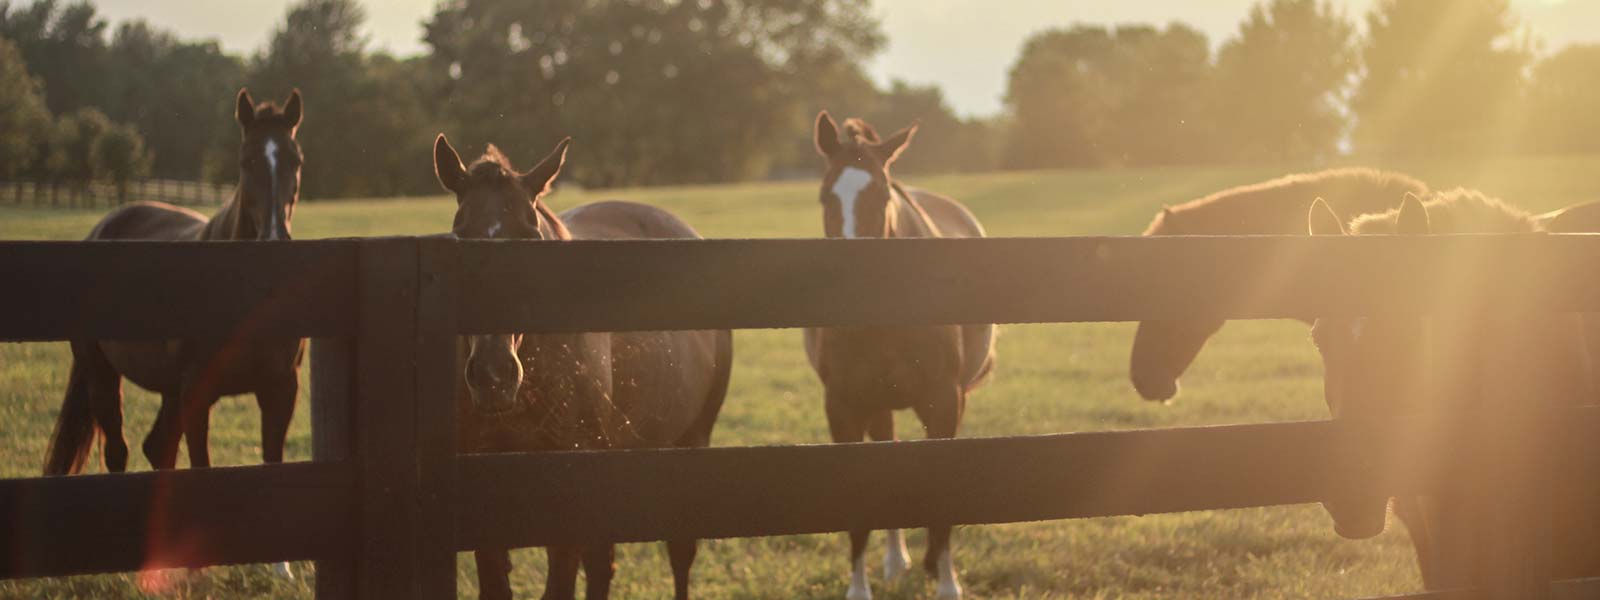 Friendly horses await at our romantic Bed and Breakfast in Kentucky, where you'll find plenty of the top romantic things to do in Kentucky nearby